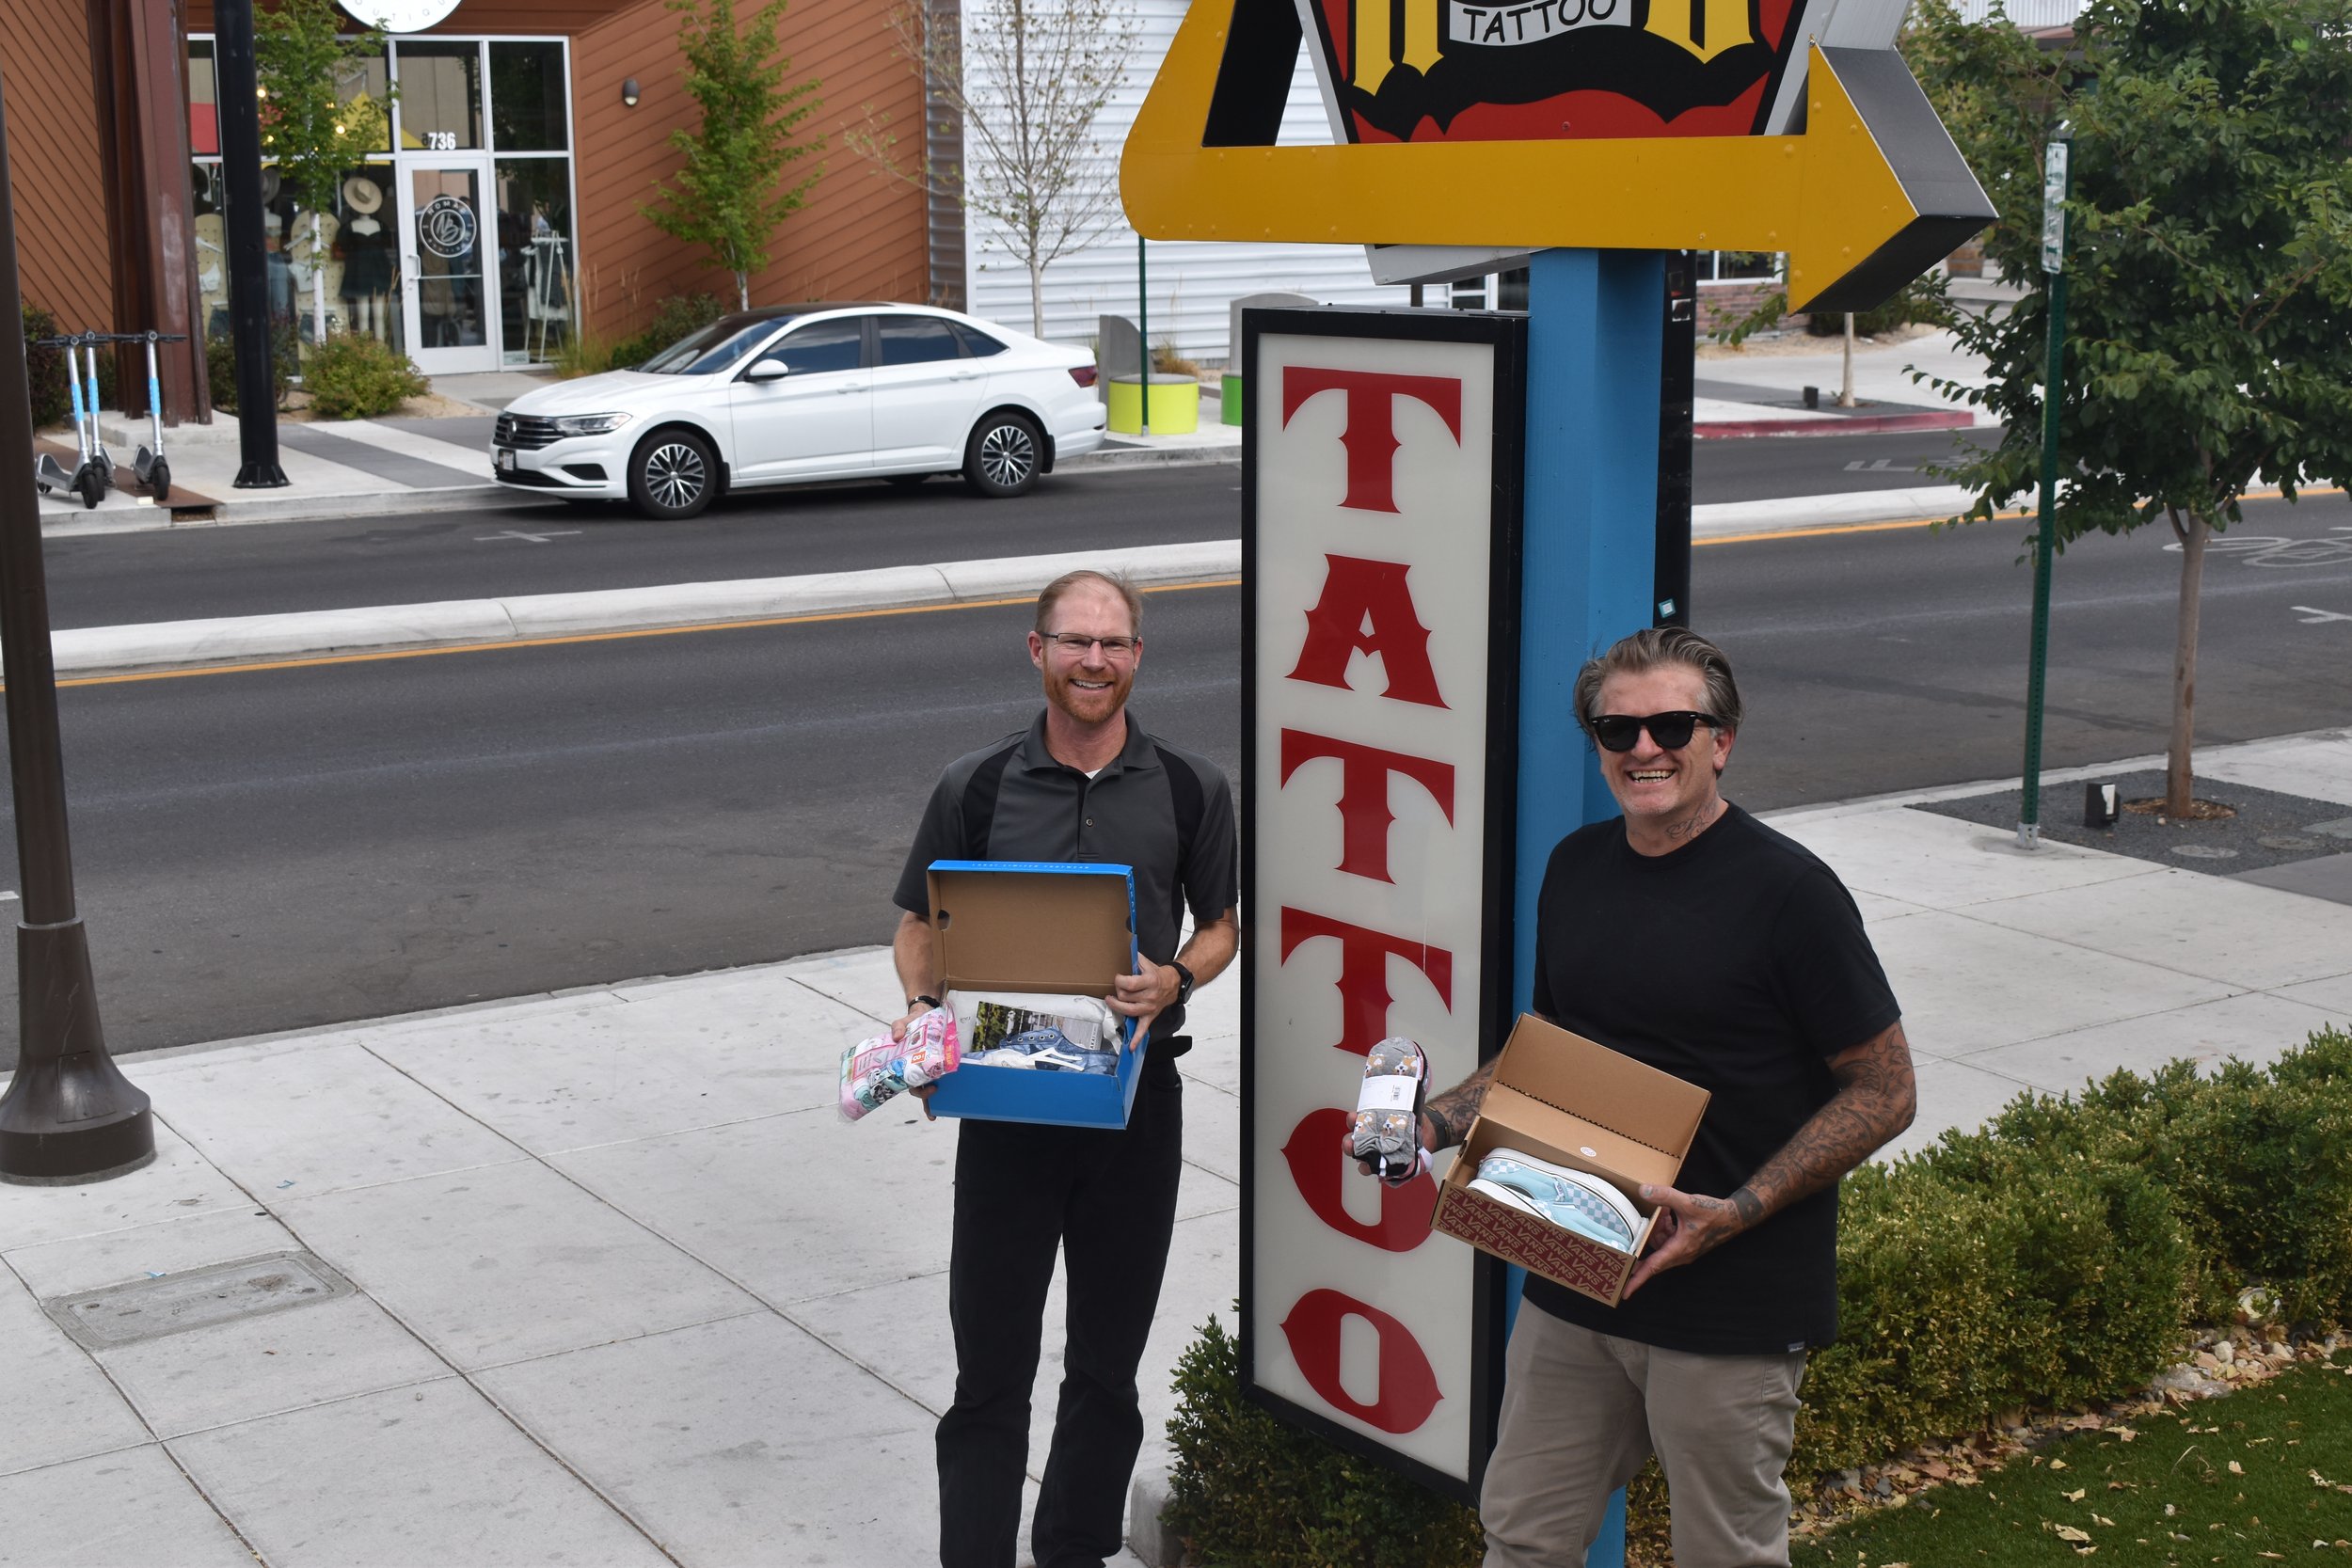 Reno Tattoo Shops Helping Unhoused School Children for First Day of School  — Our Town Reno